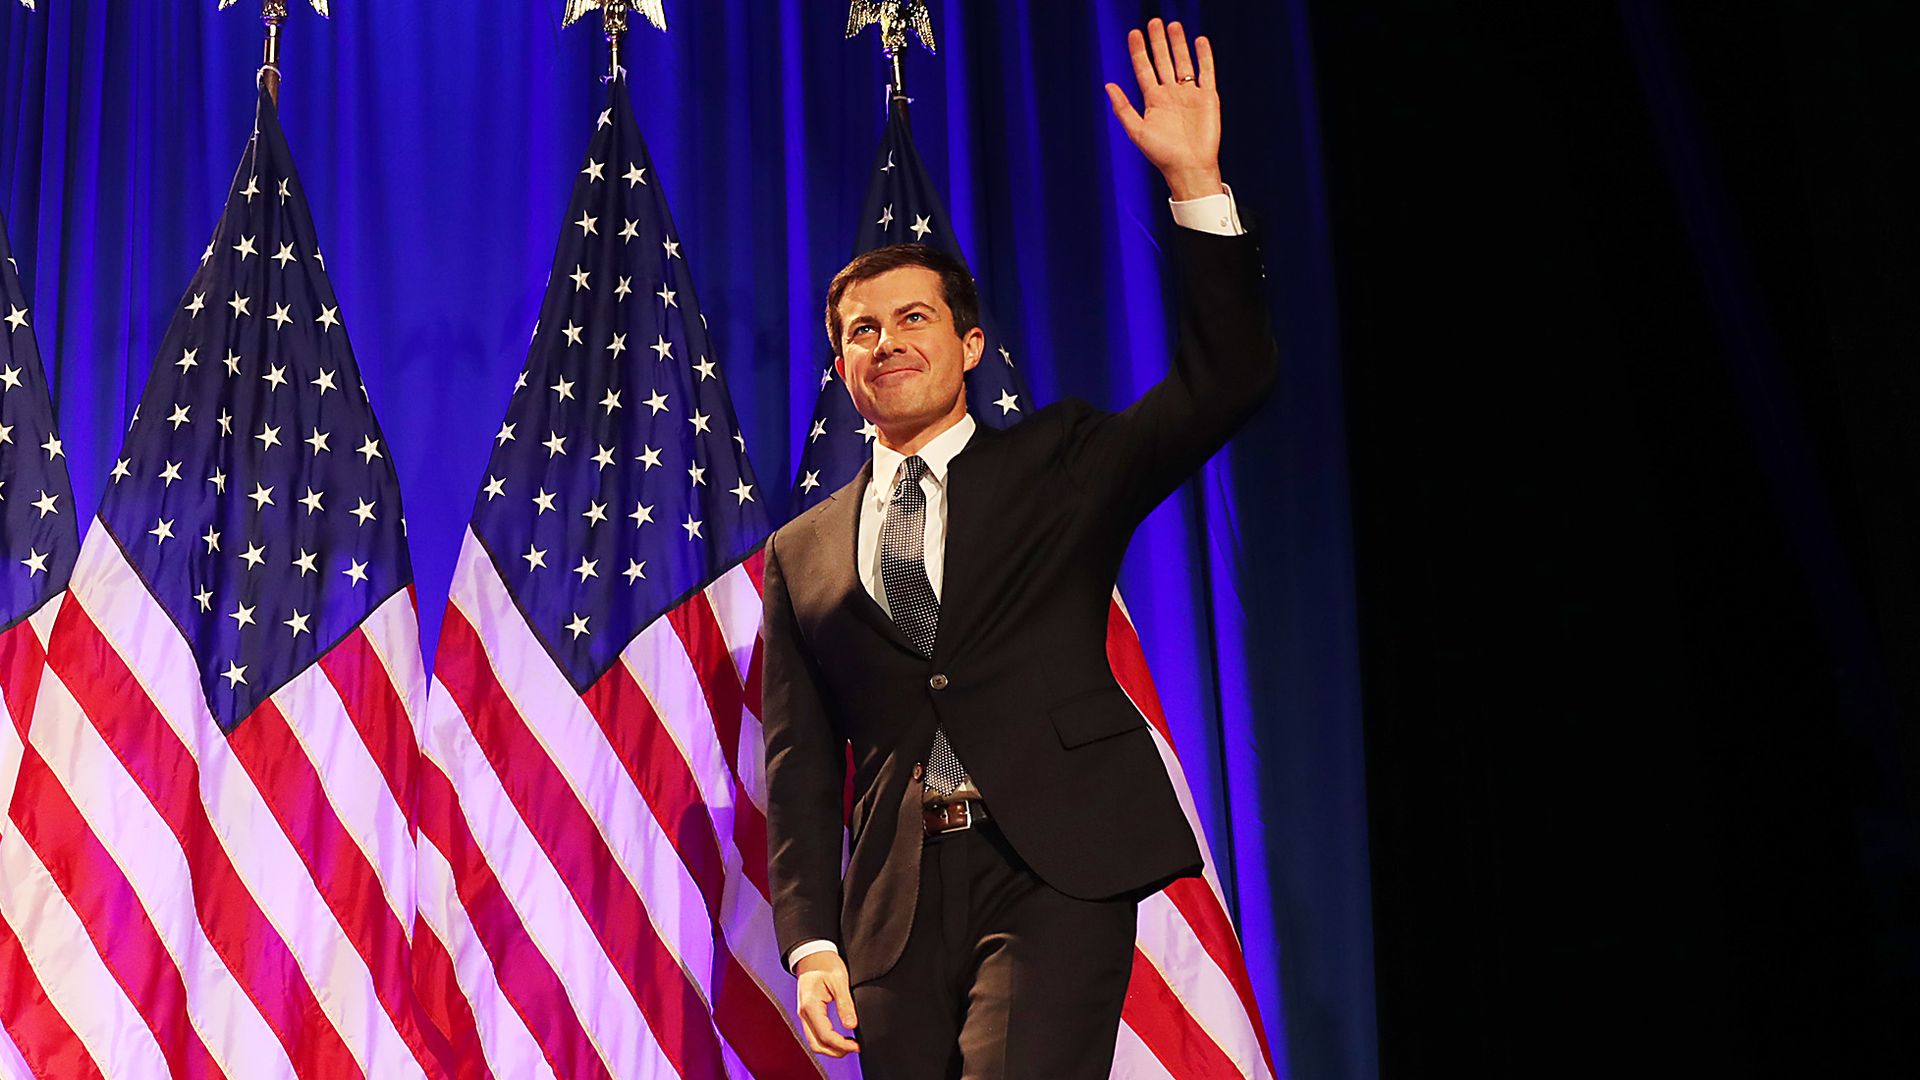 Democratic presidential candidate Pete Buttigieg arrives on stage at a Veterans Day address at the Rochester Opera House on November 11, 2019 in Rochester, New Hampshire.